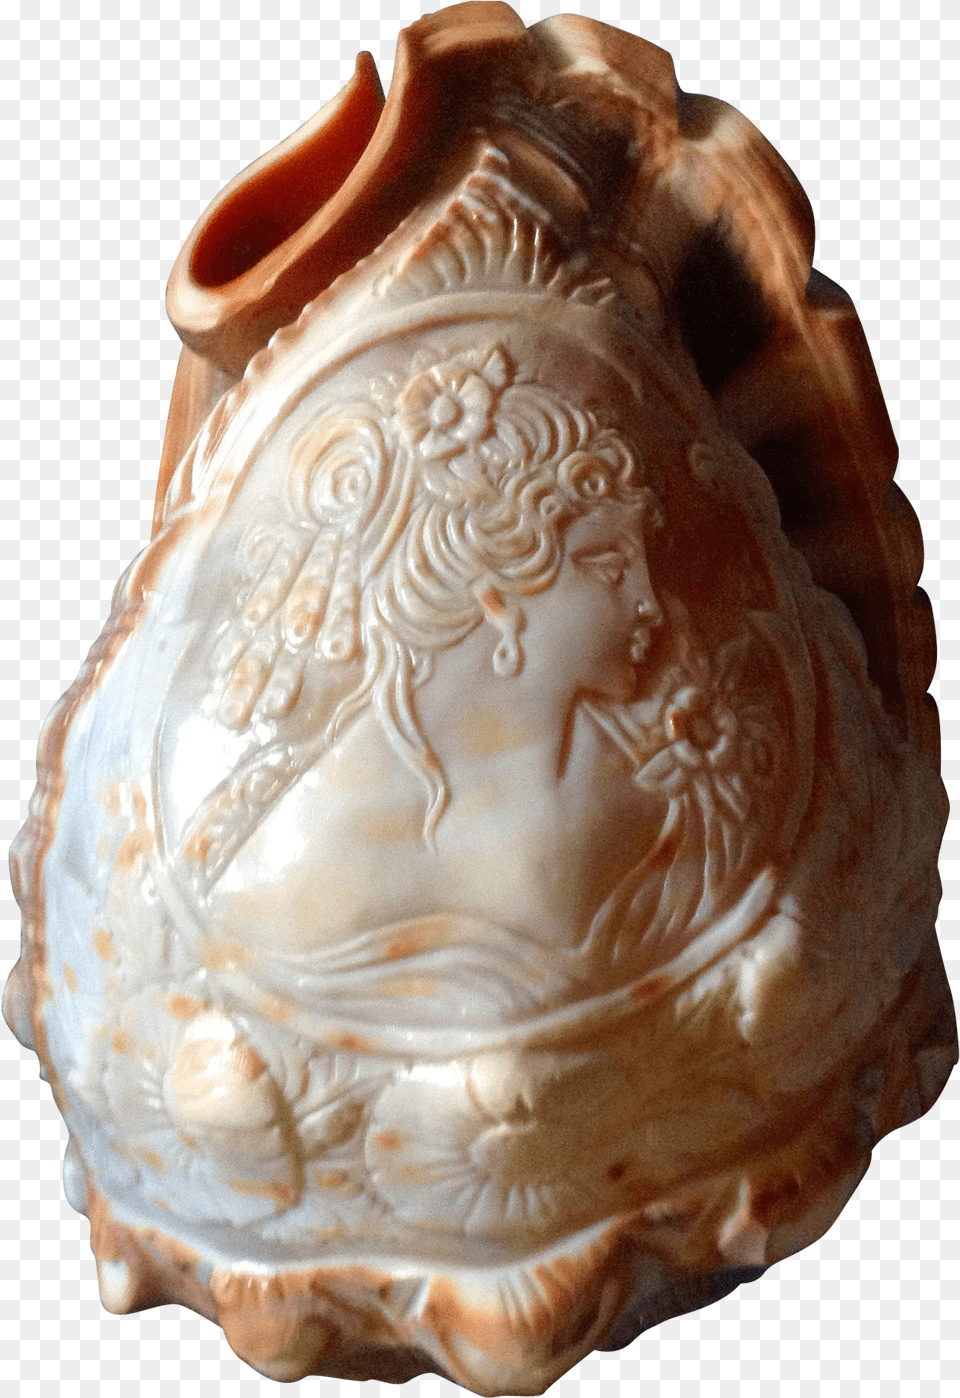 Conch Shell Cameo Vintage Victorian Woman Carved Cameo Retro Conch Shell Lamp, Animal, Seashell, Sea Life, Invertebrate Png